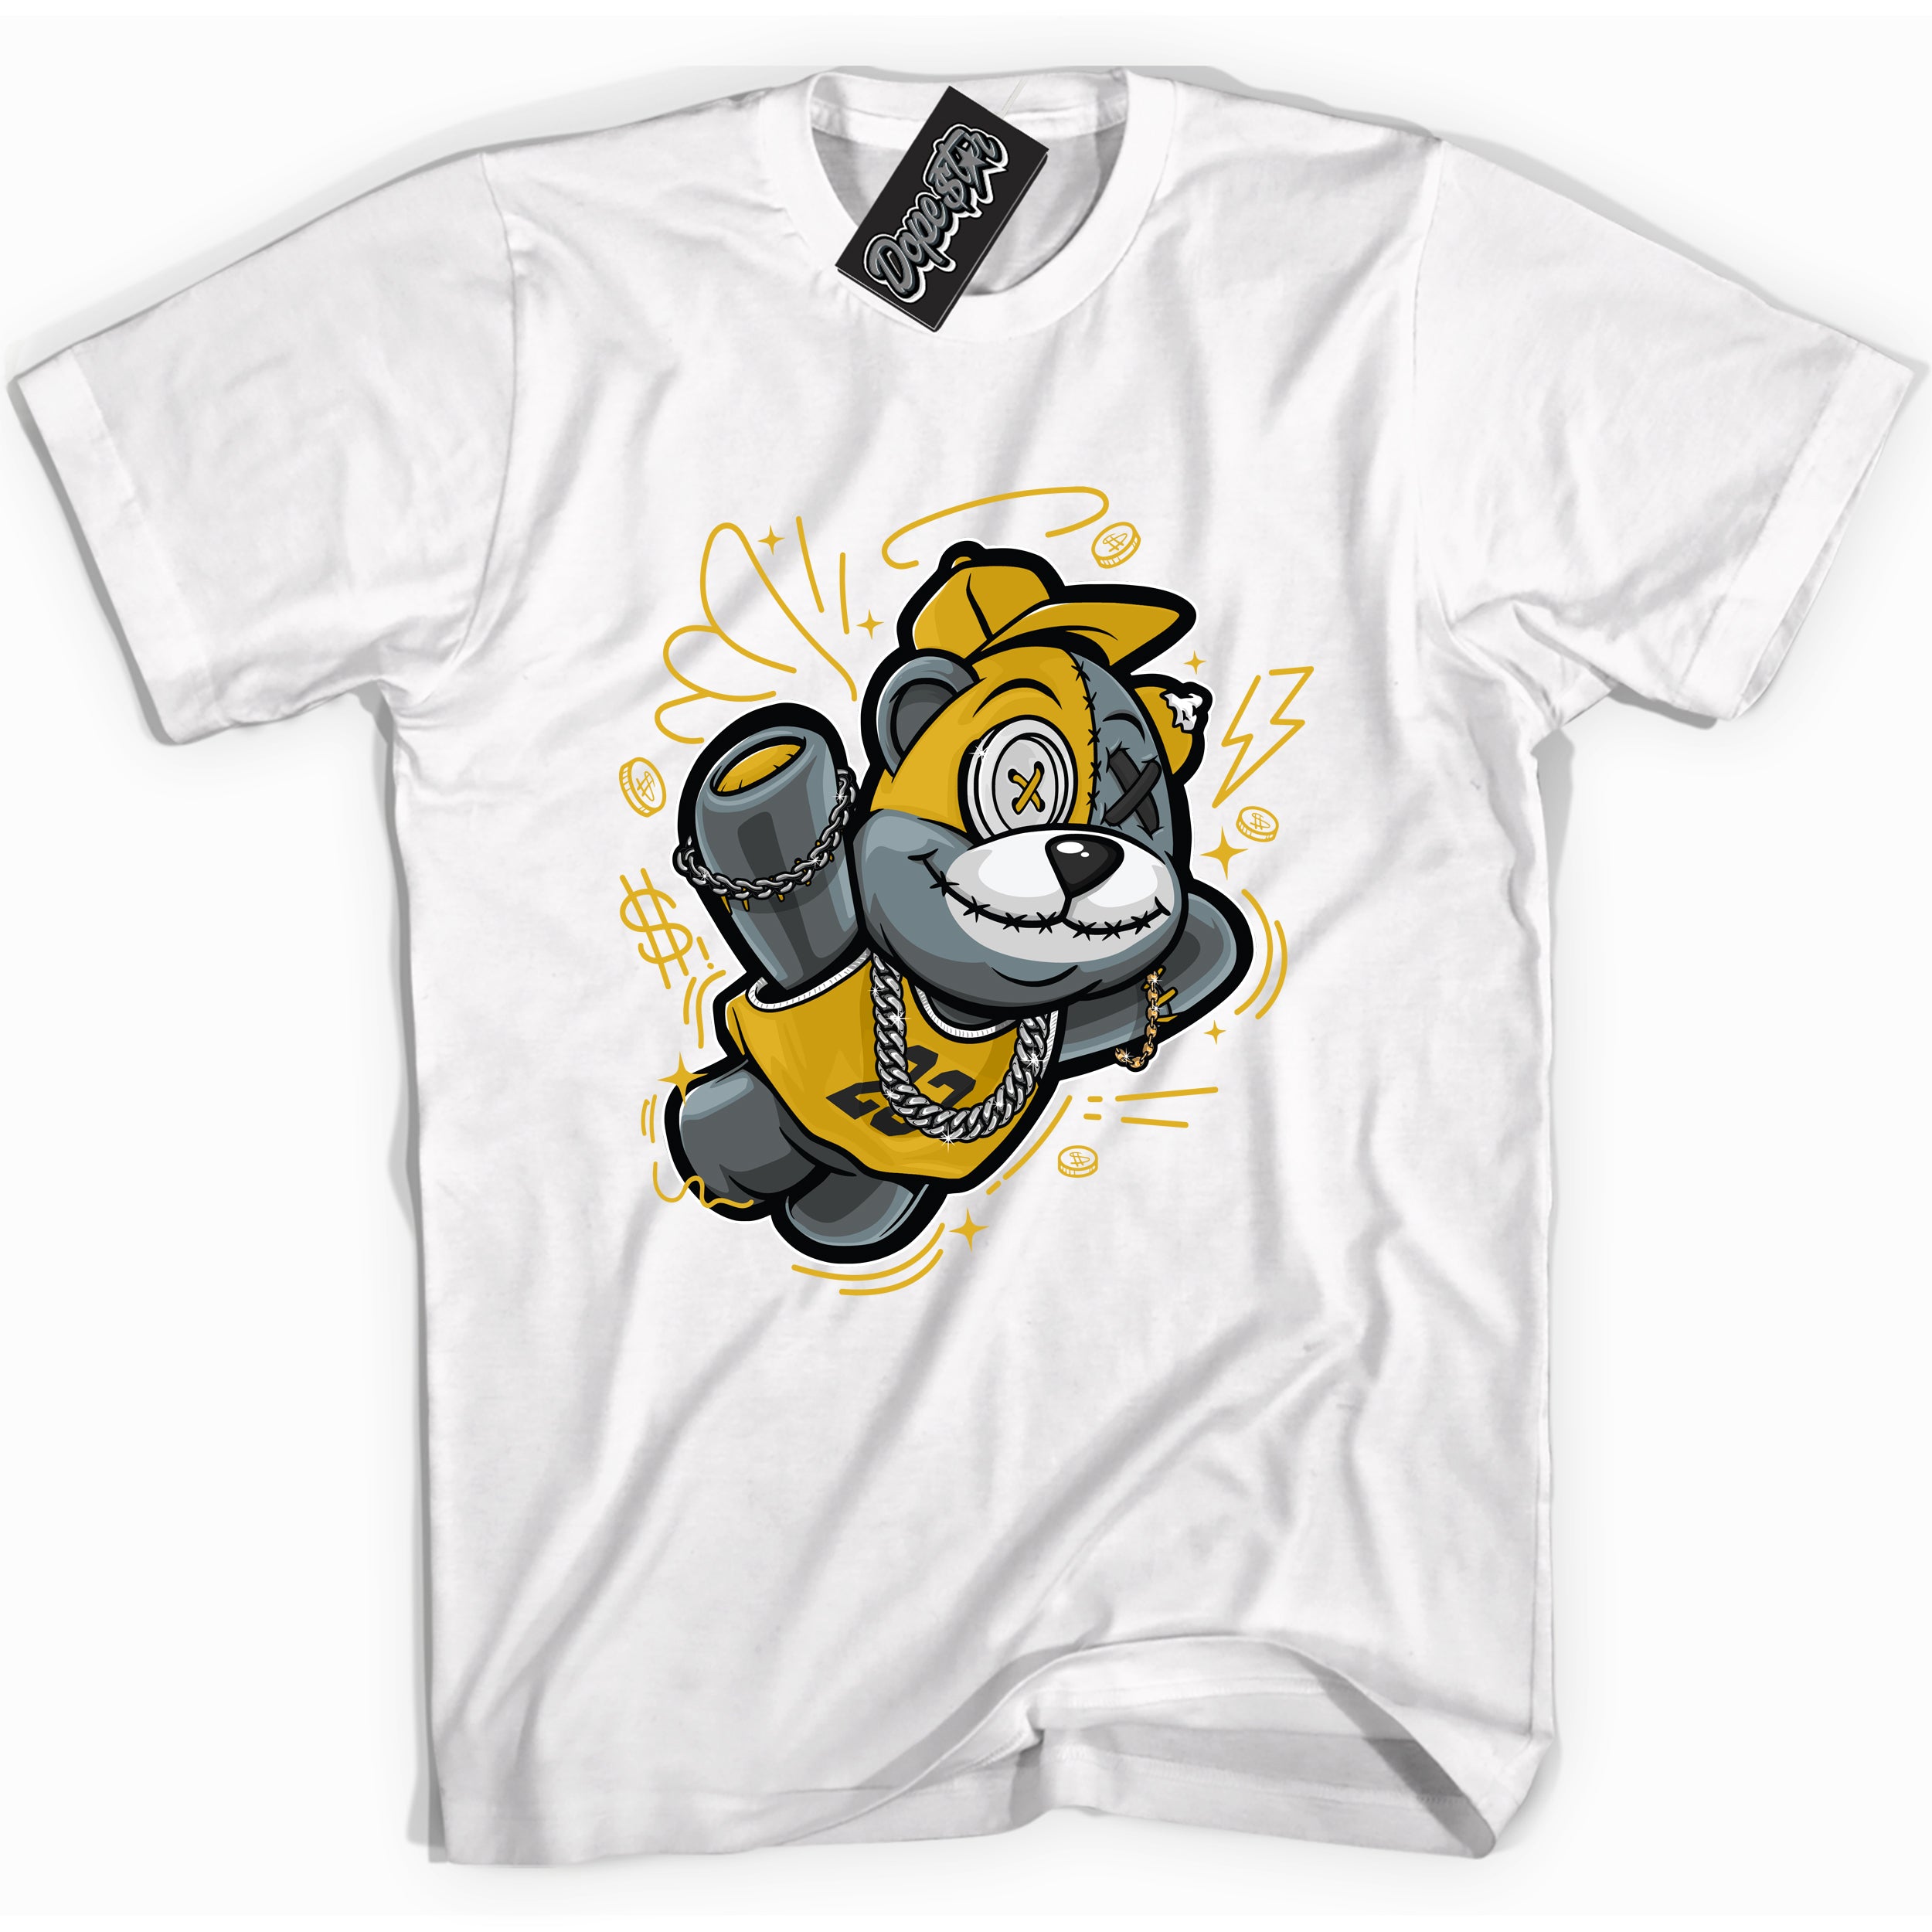 Cool White Shirt with “ Slam Dunk Bear” design that perfectly matches Yellow Ochre 6s Sneakers.